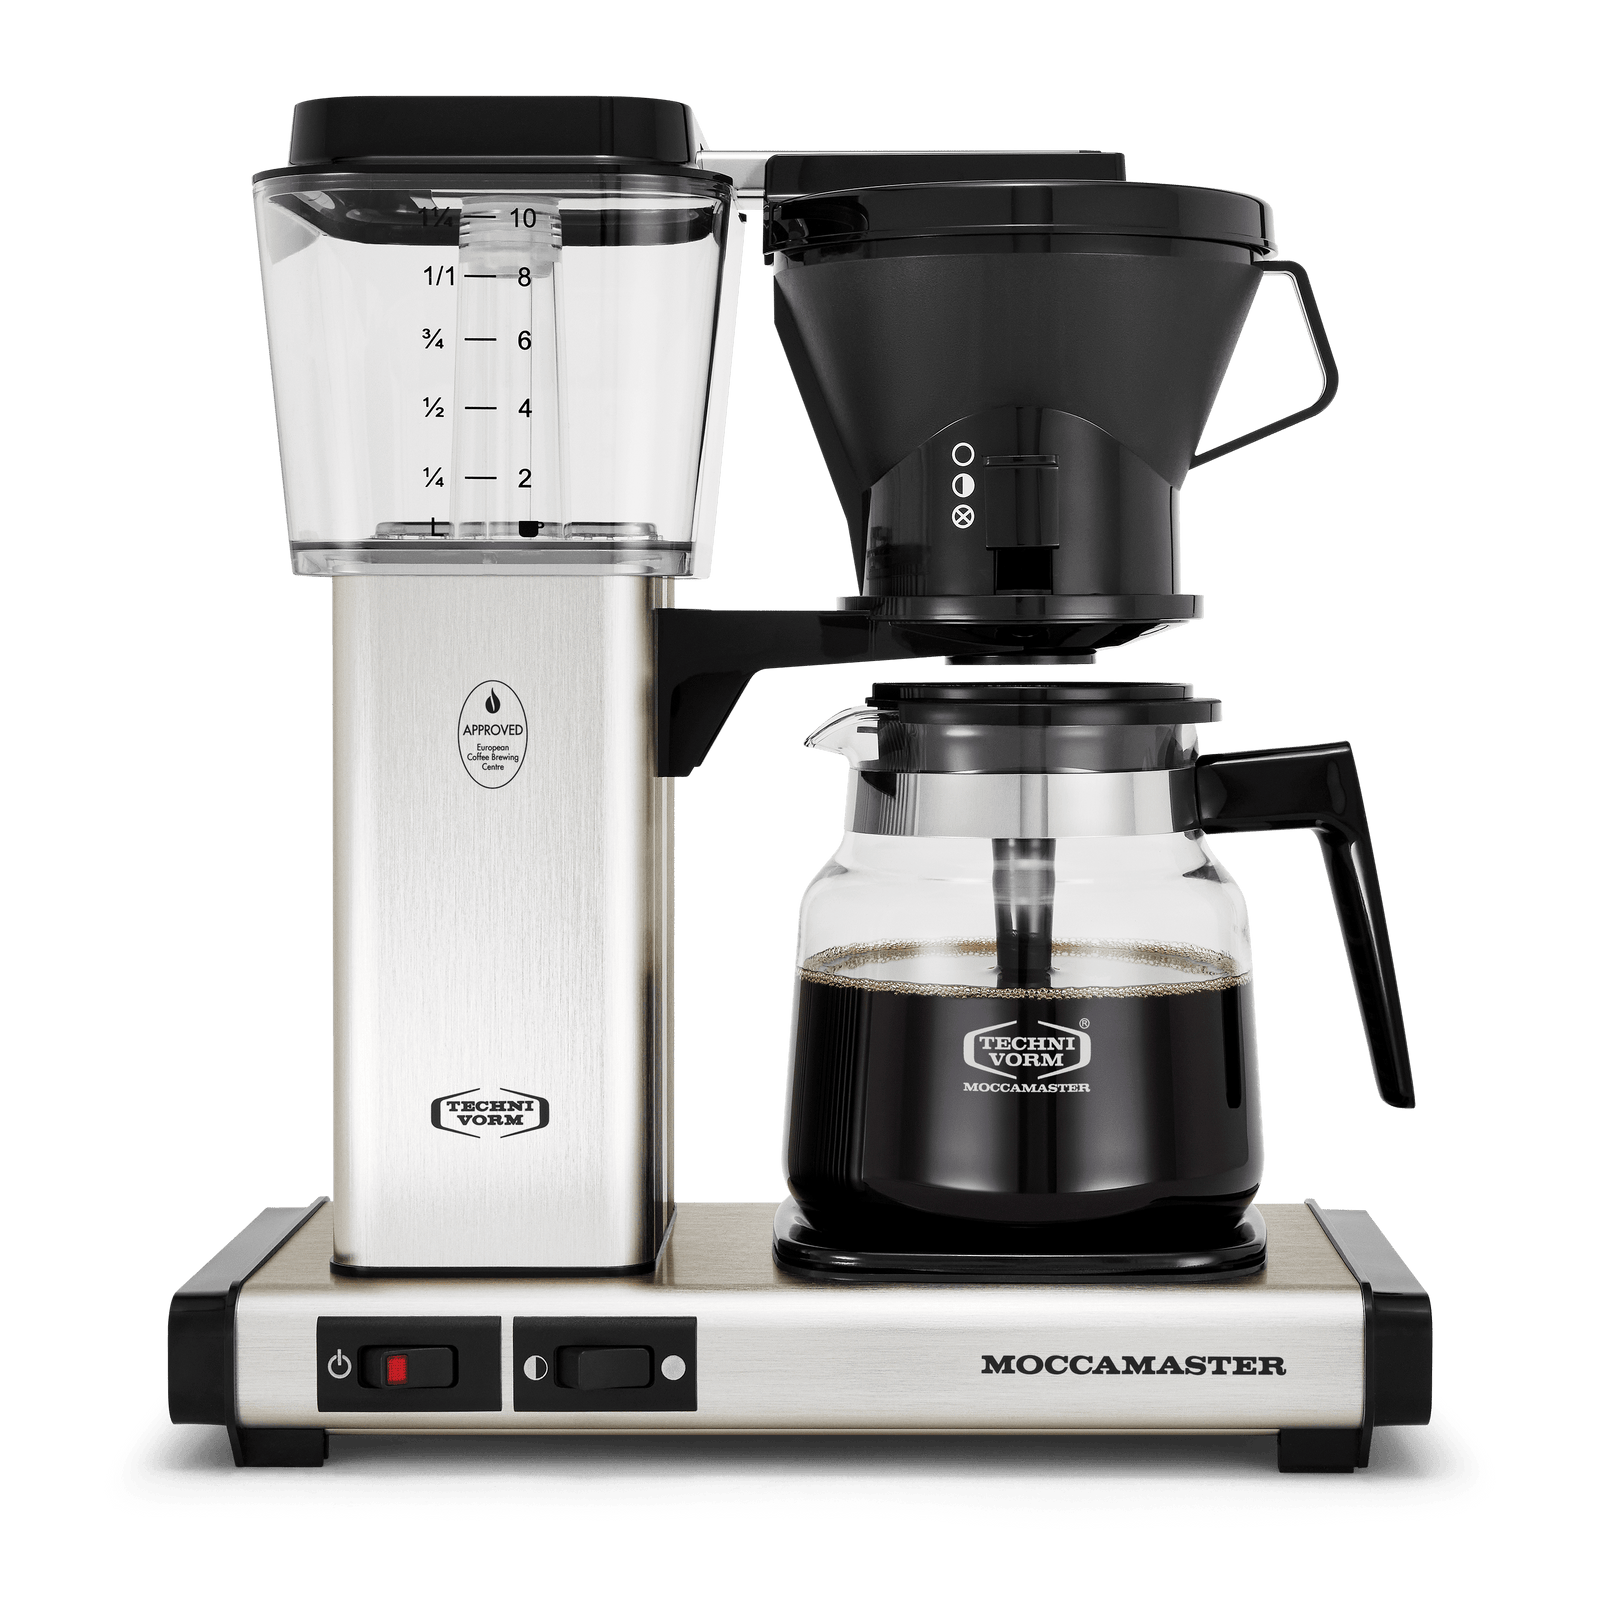  Technivorm Moccamaster 79112 KBT Coffee Brewer, 40 oz, Polished  Silver: Drip Coffeemakers: Home & Kitchen